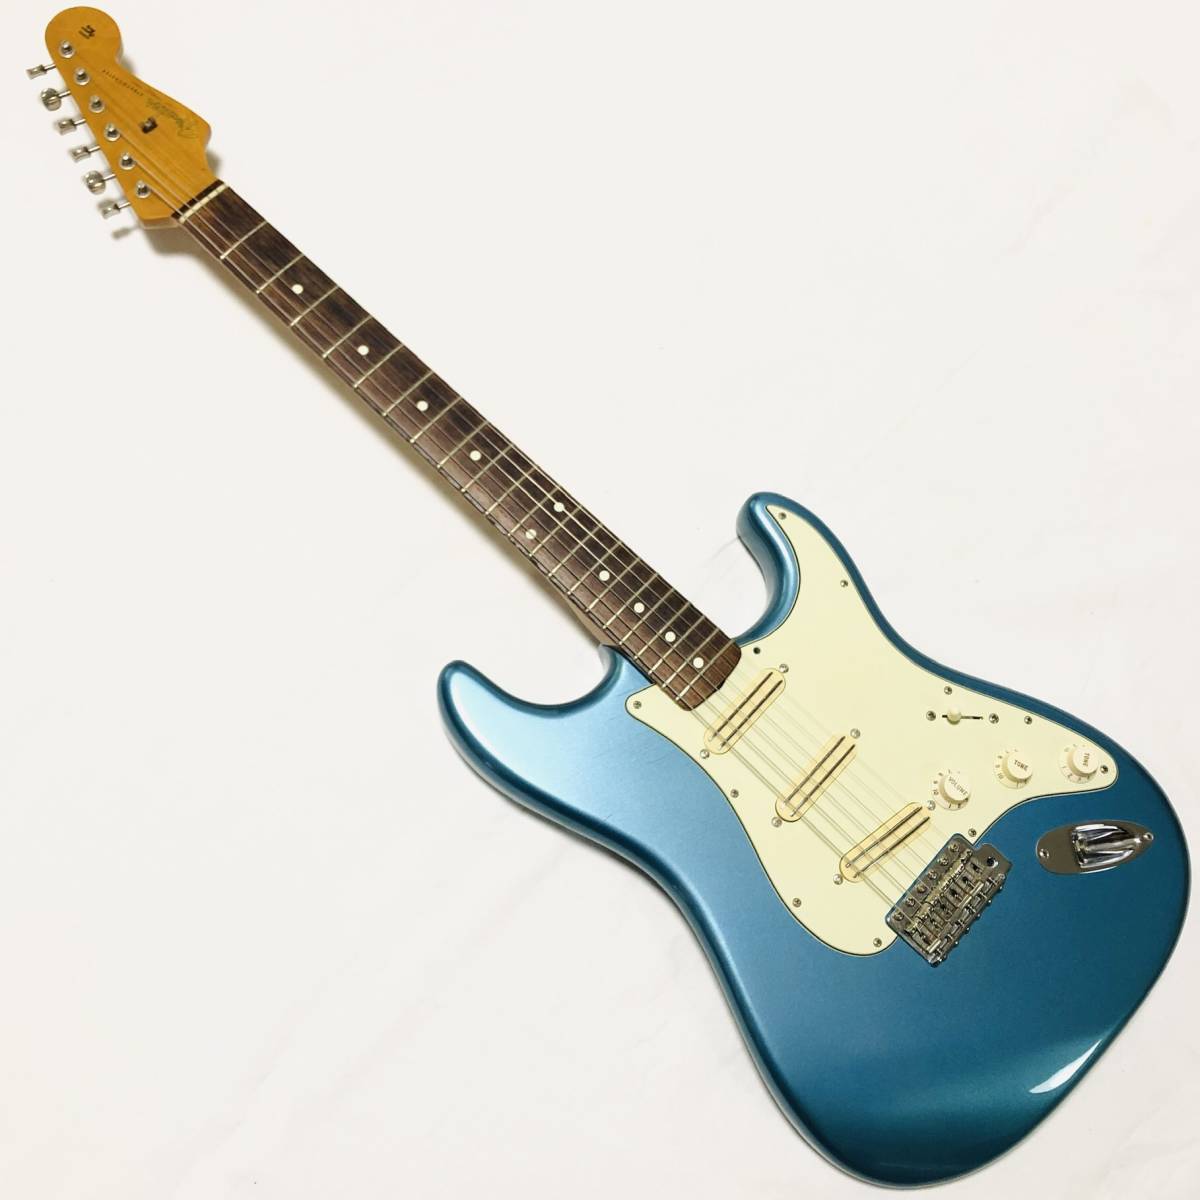 Fender Stratocaster Classic 60s Made in Mexico フェンダー ストラトキャスター クラシック メキシコ _画像1